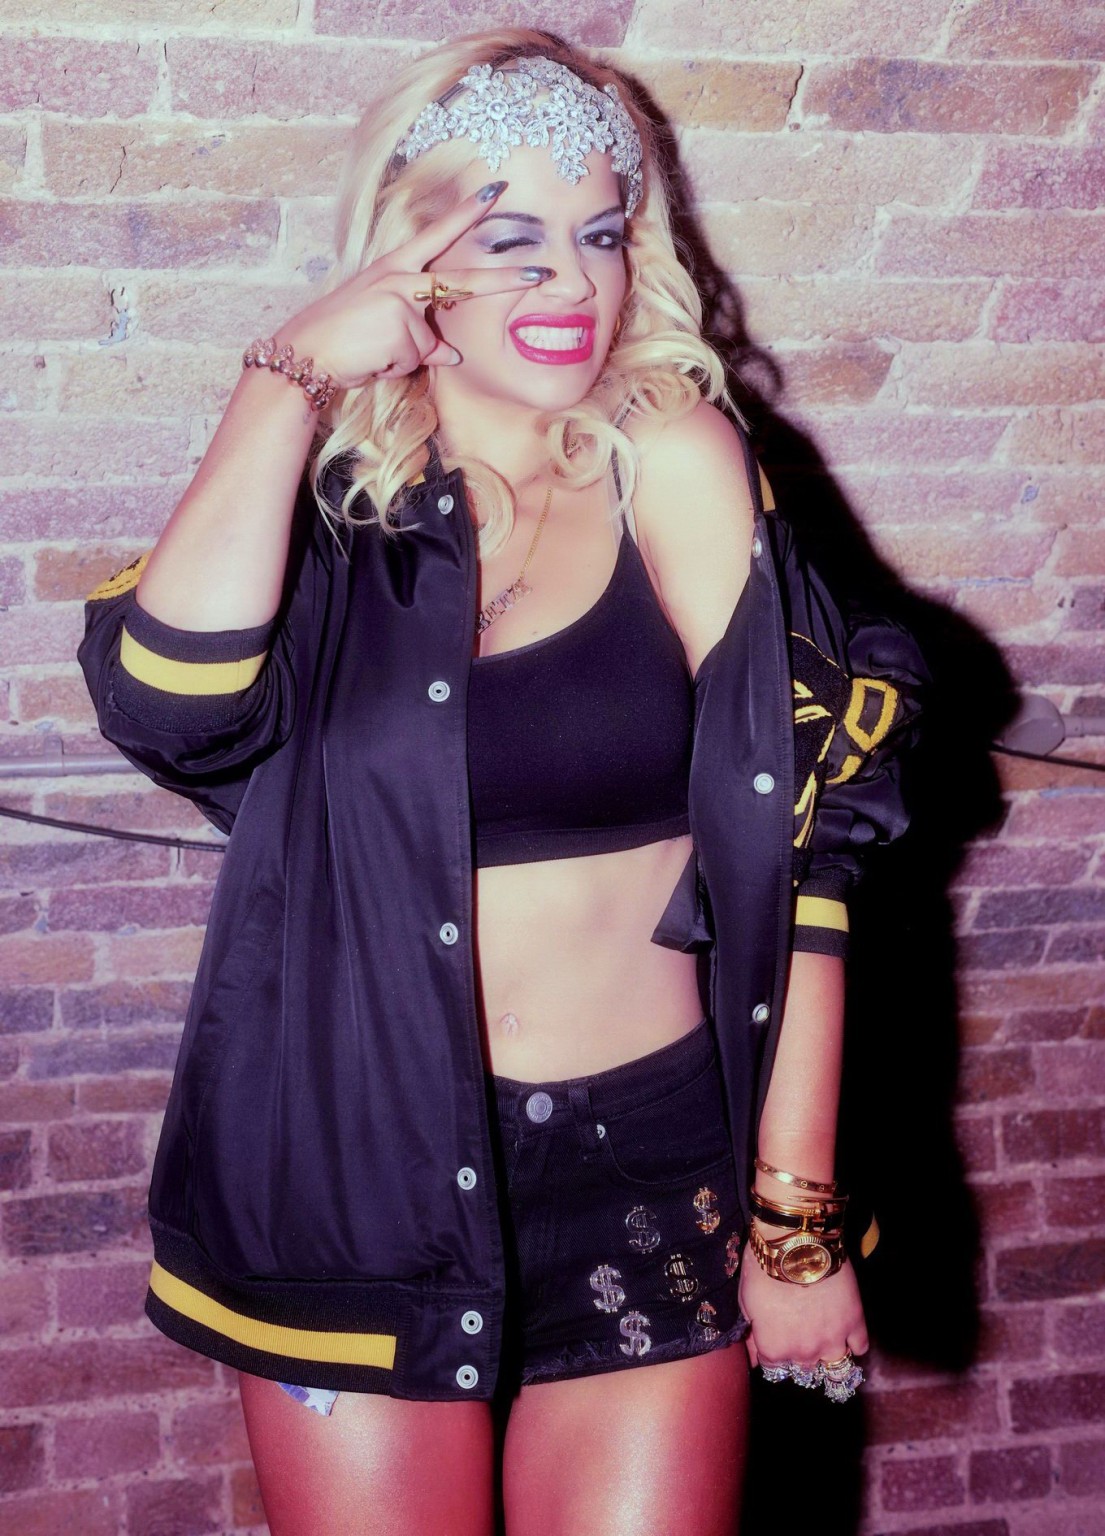 Rita Ora performing in black belly top and tight shorts at G-A-Y Club in London #75213404